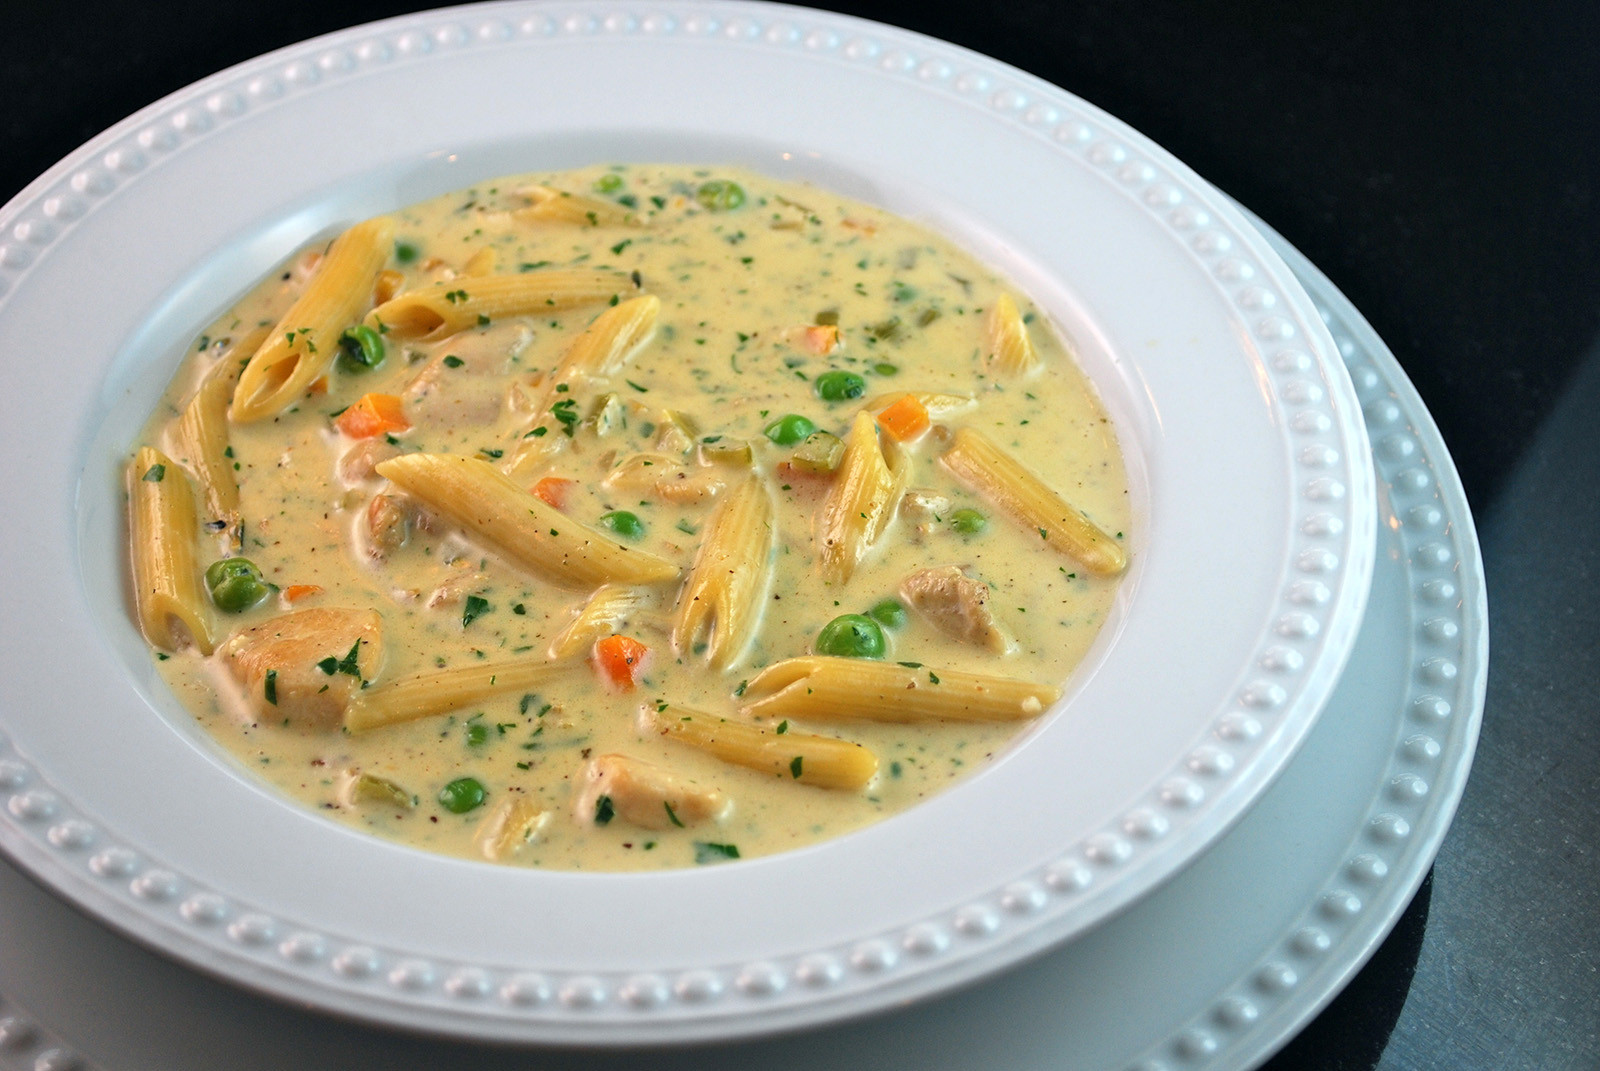 Recipes Using Cream Of Chicken Soup And Pasta
 23 Freezable soups to enjoy this winter